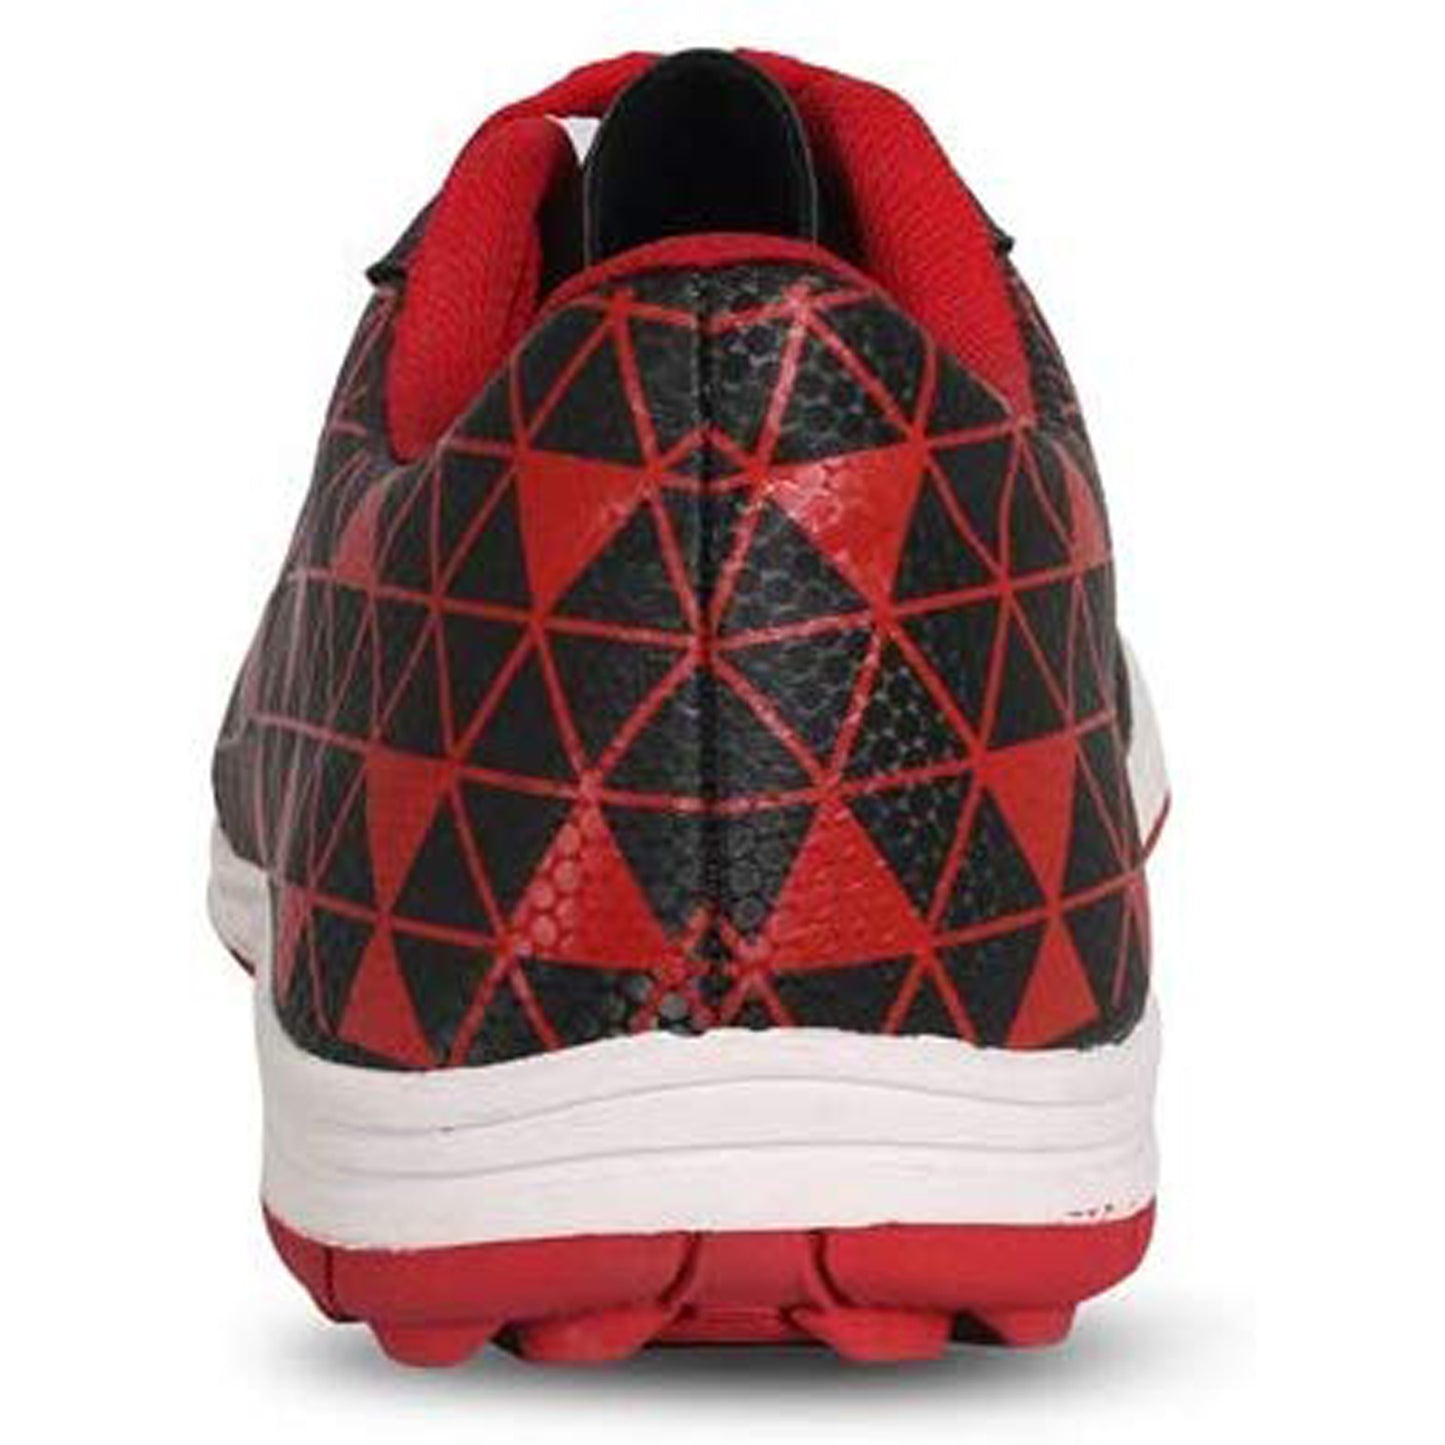 Vector X Discovery Football Shoes (Black/Red) - Best Price online Prokicksports.com